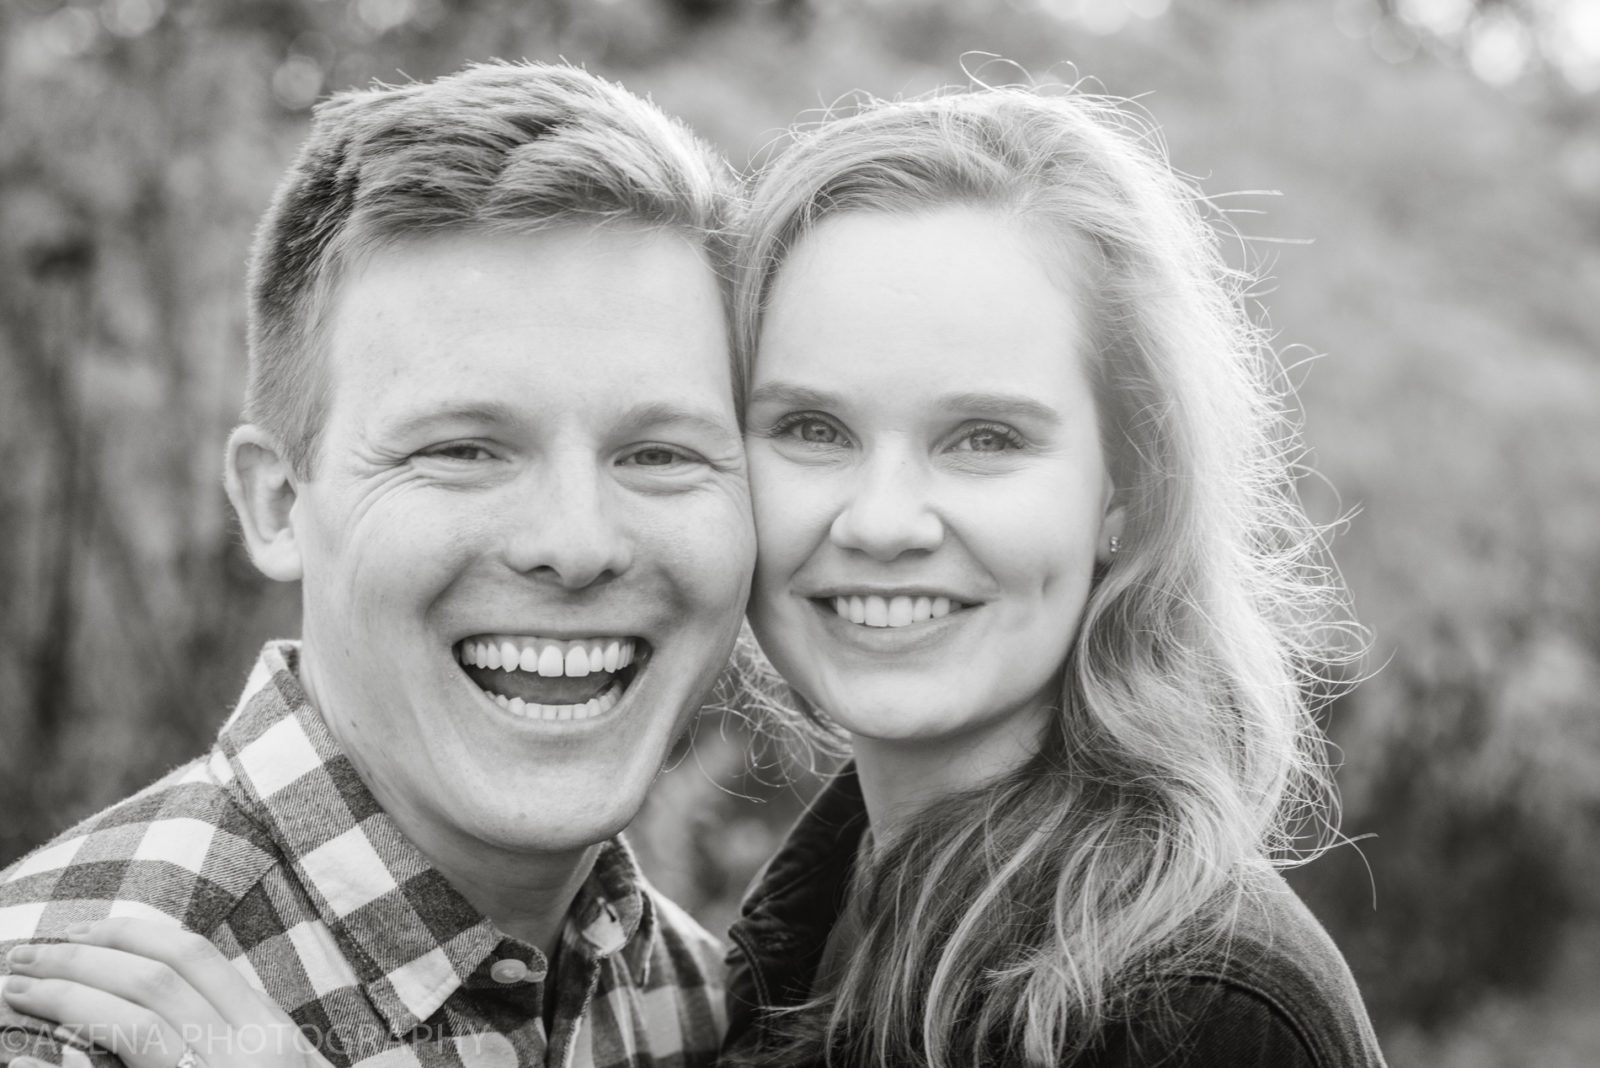 Black and white close up photo of a happy couple smiling